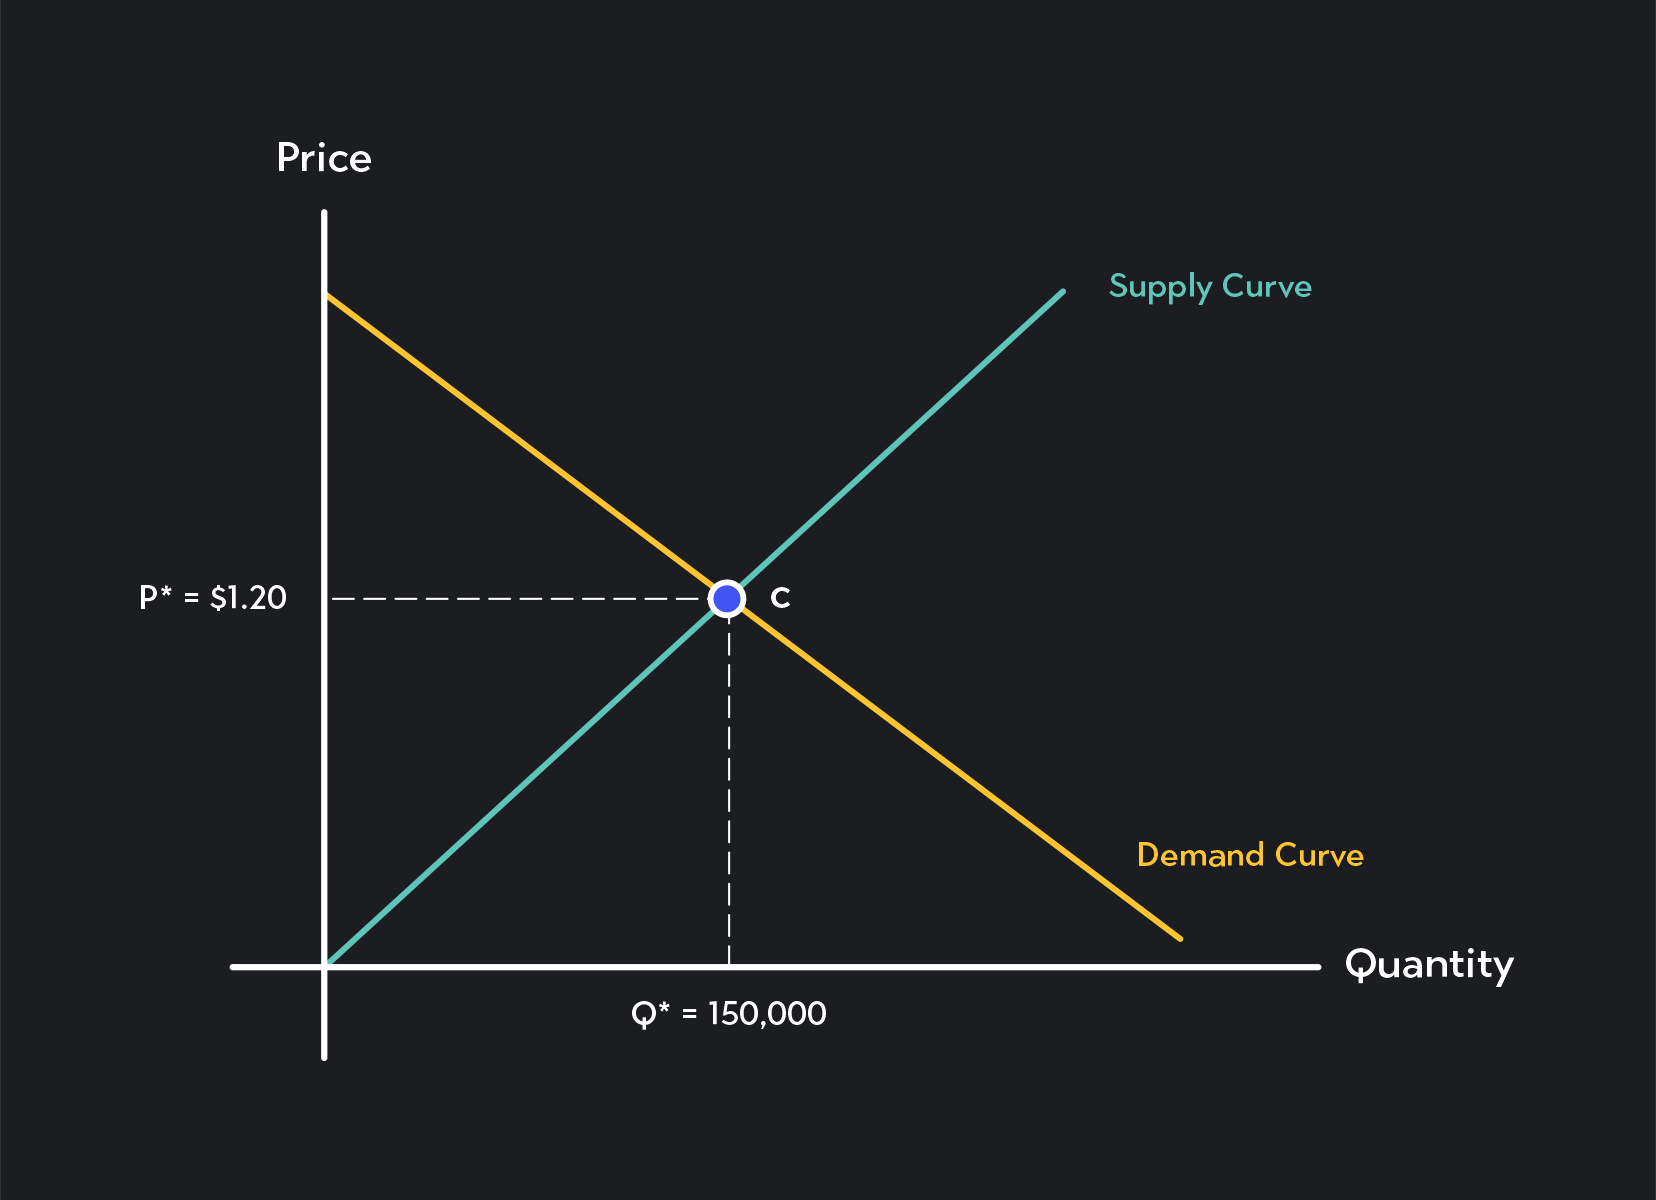 Graph model of perfect competition where the market-clearing or equilibrium price and quantity are shown by the intersection of supply and demand curves.